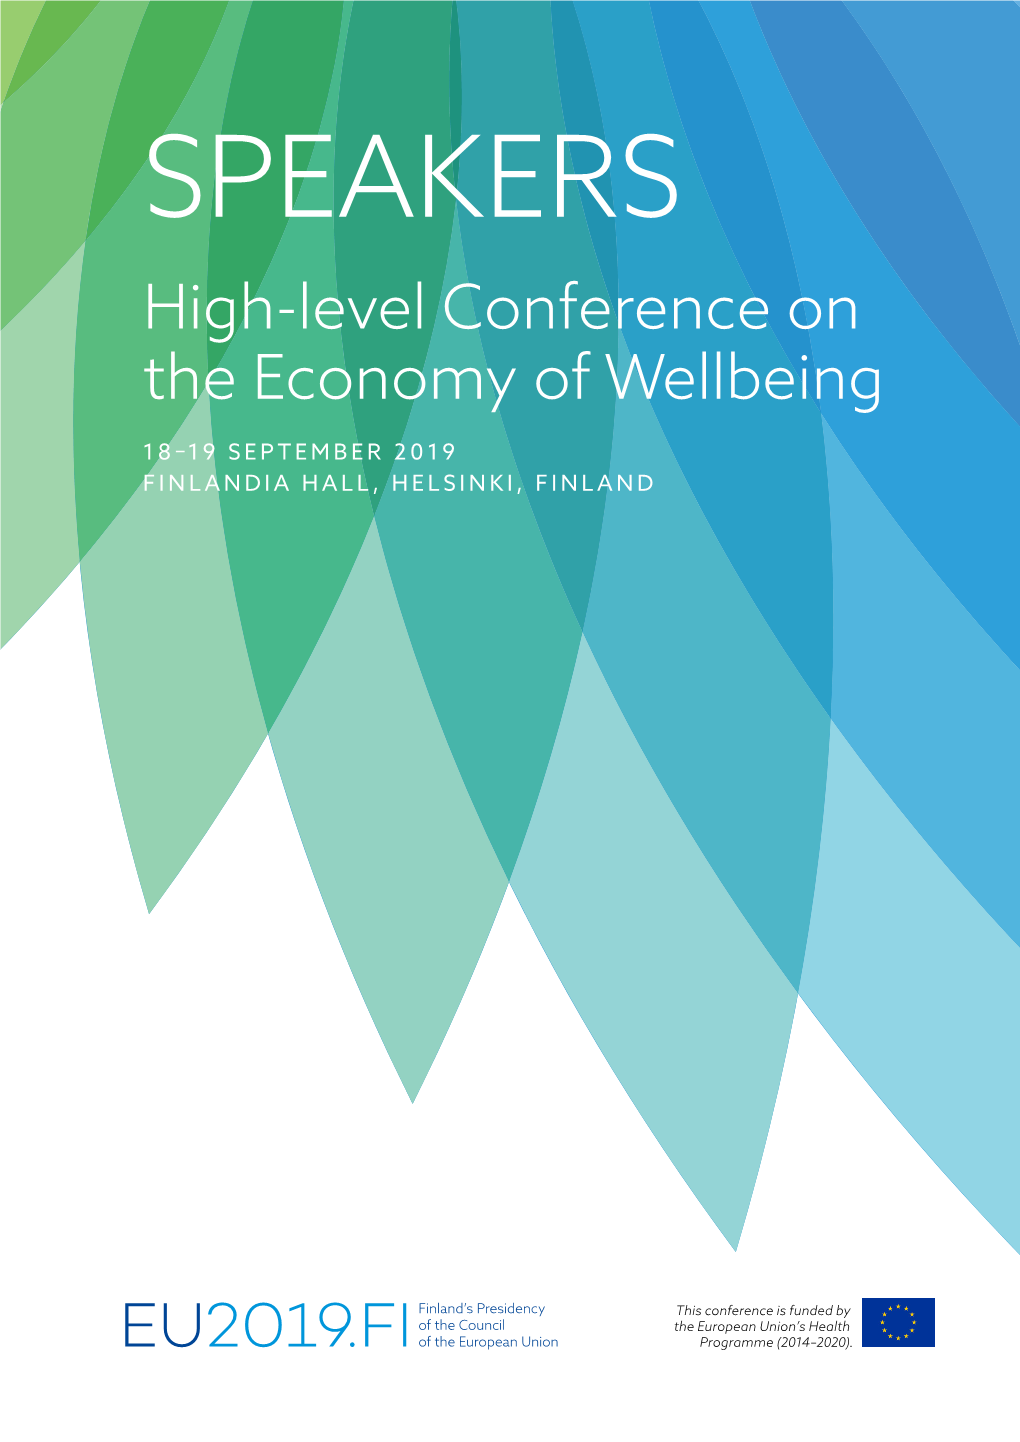 SPEAKERS High-Level Conference on the Economy of Wellbeing